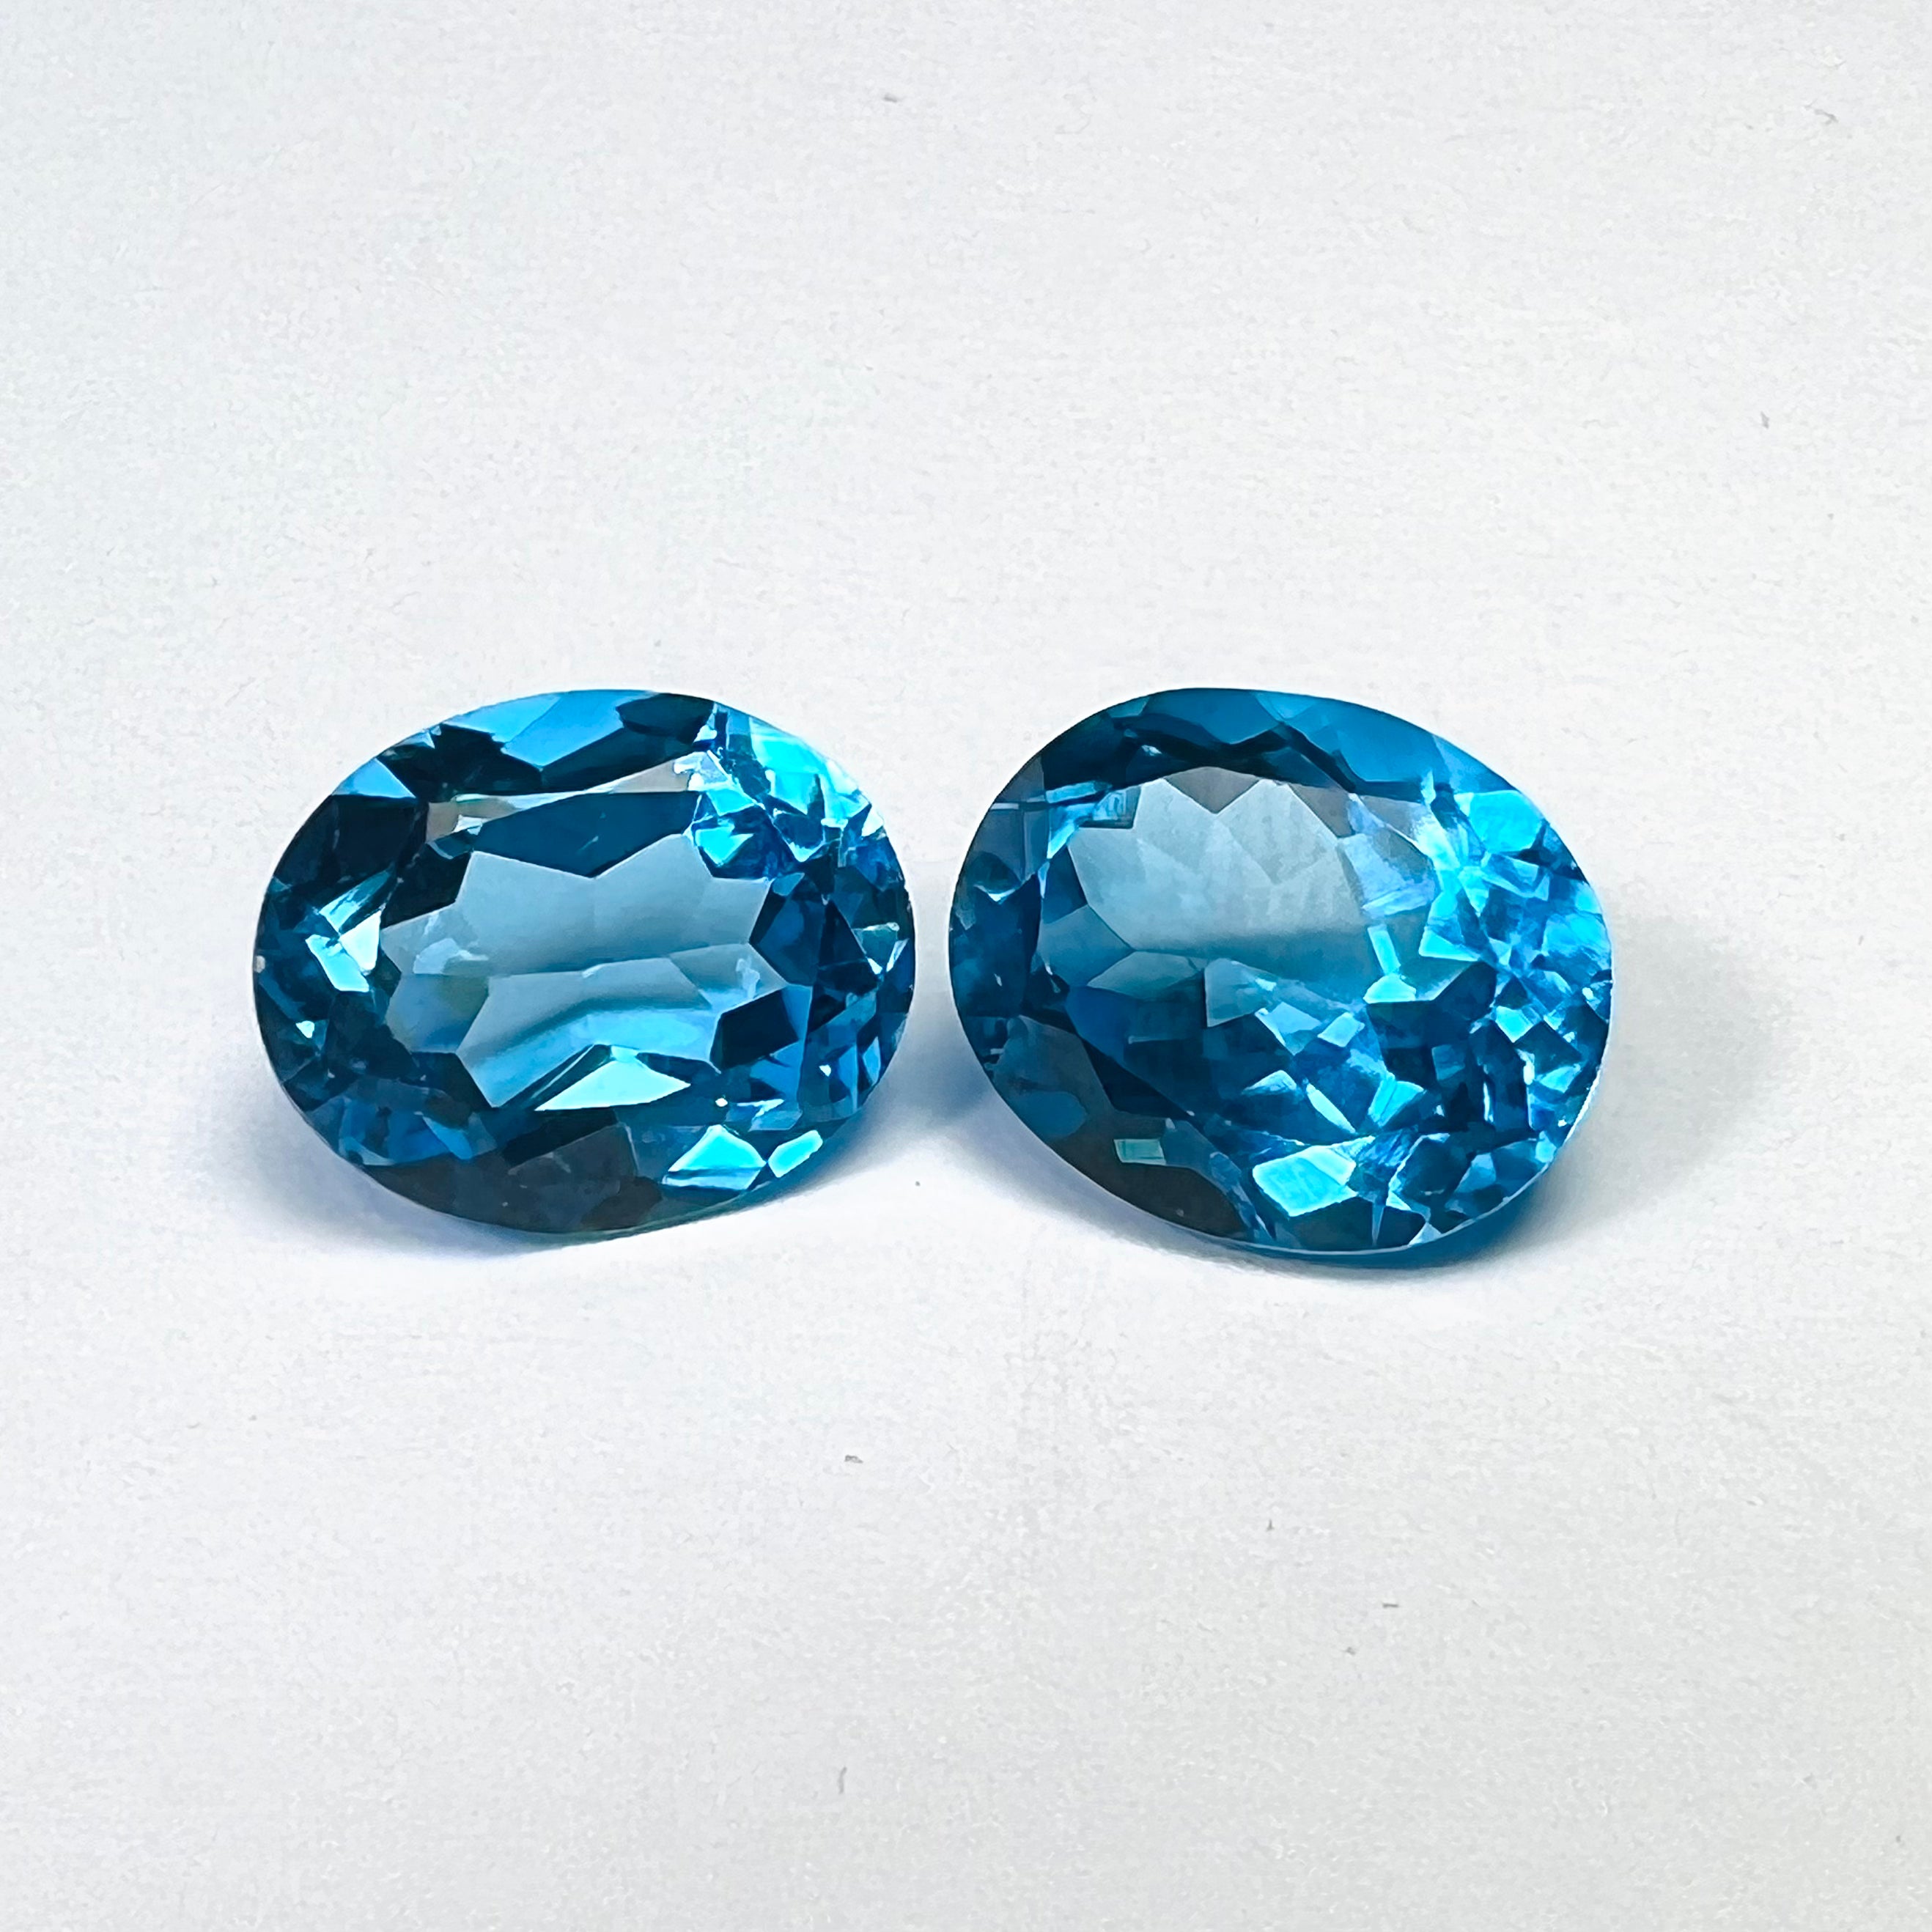 11.48CTW Pair of Loose Natural Oval Cut Topaz 12x10x6.4mm Earth mined Gemstone